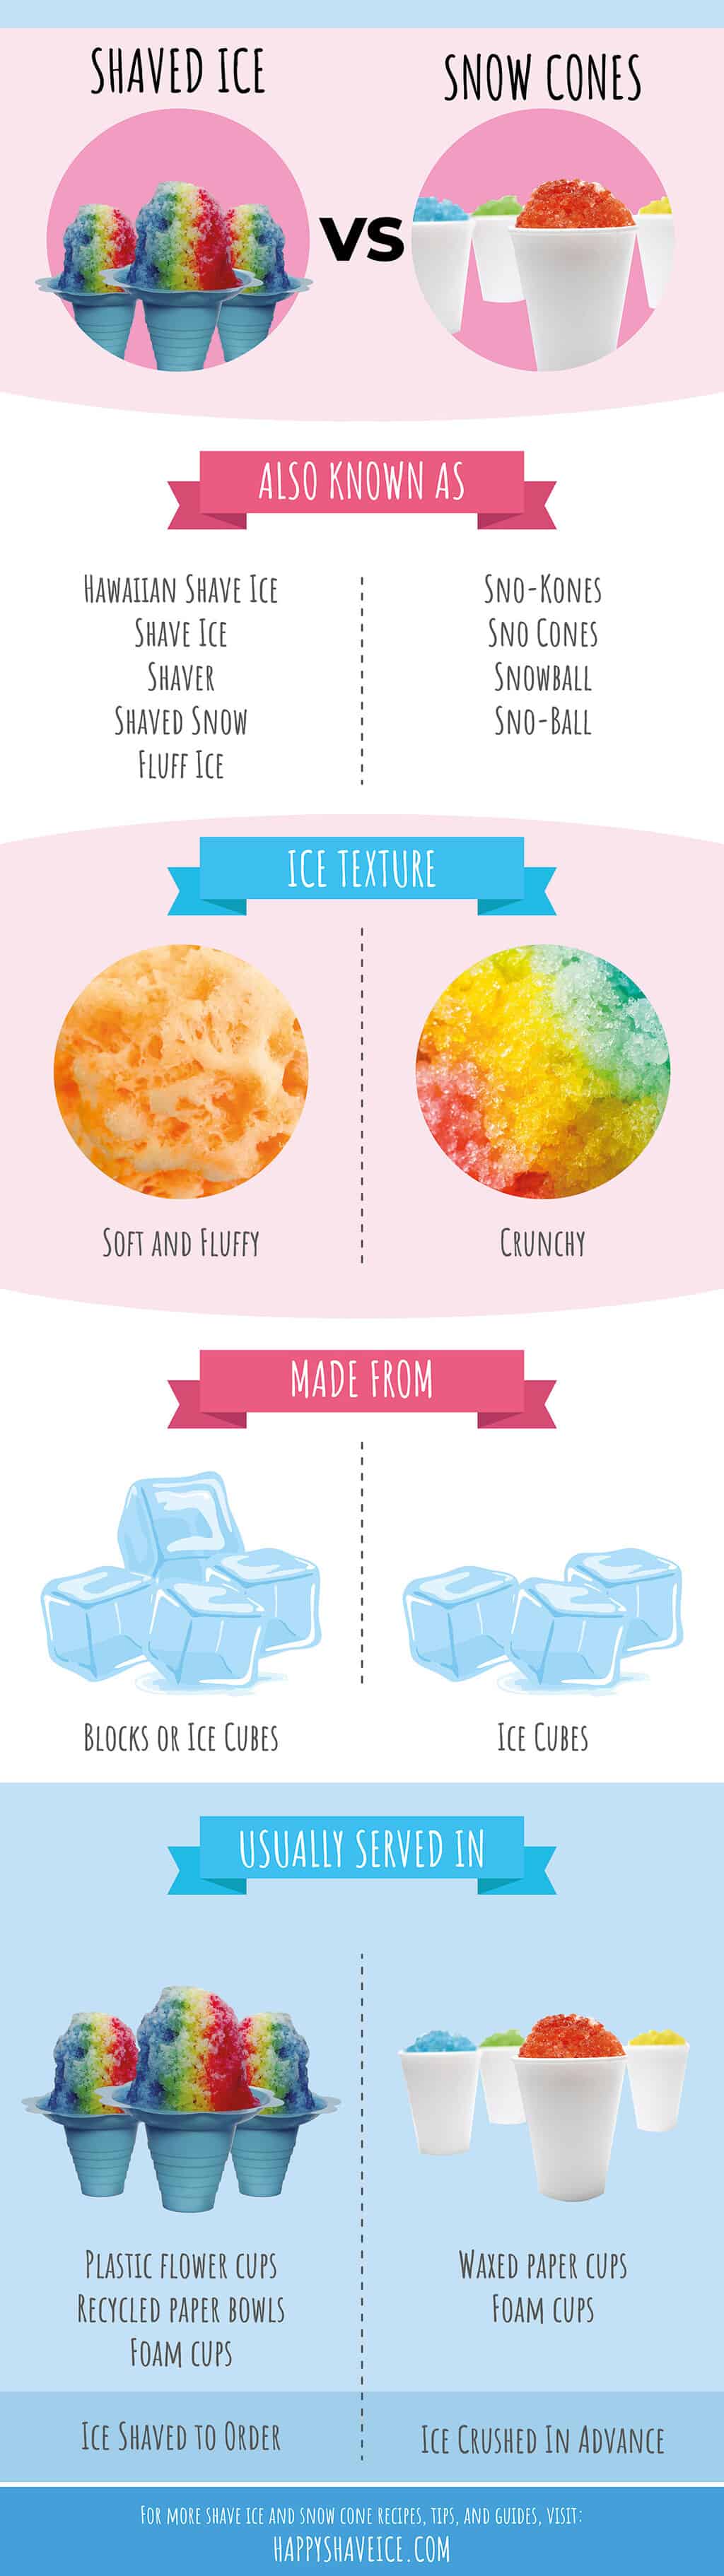 Snow Cone vs Shaved Ice What s The Difference Infographic Happy 